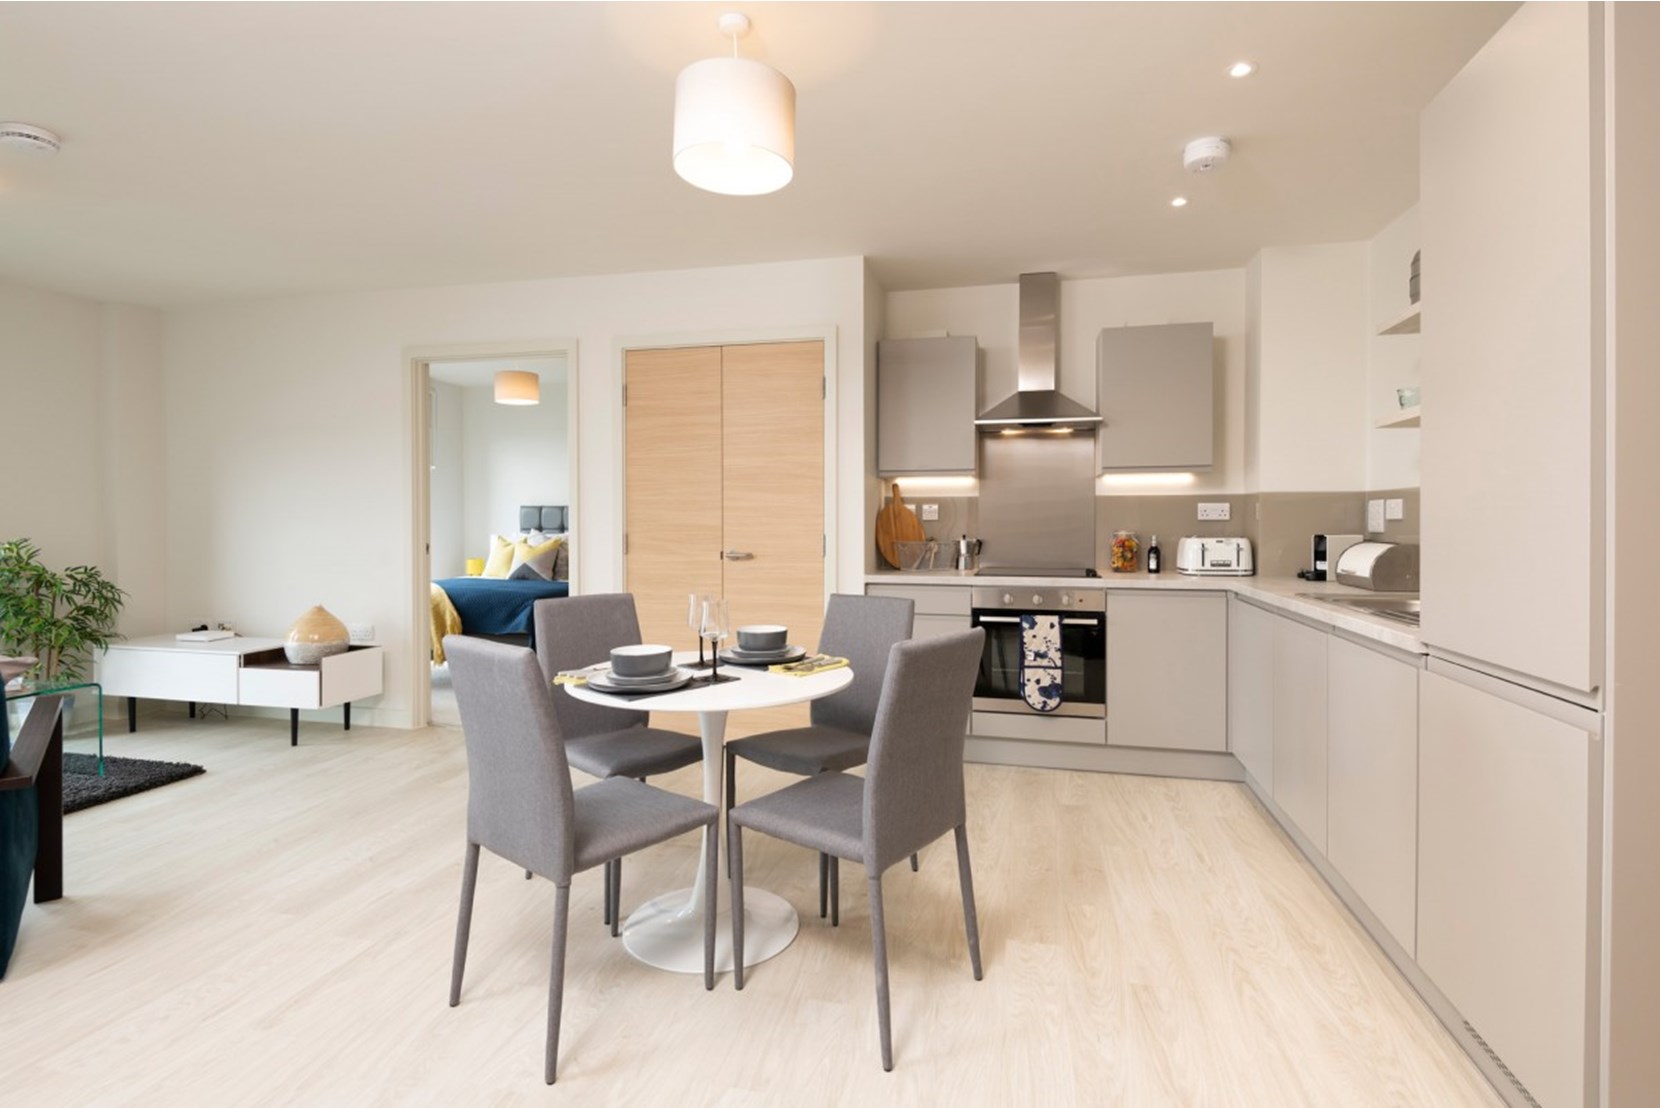 Apartment-Allsop-The-Trilogy-Manchester-interior-kitchen-dining-room